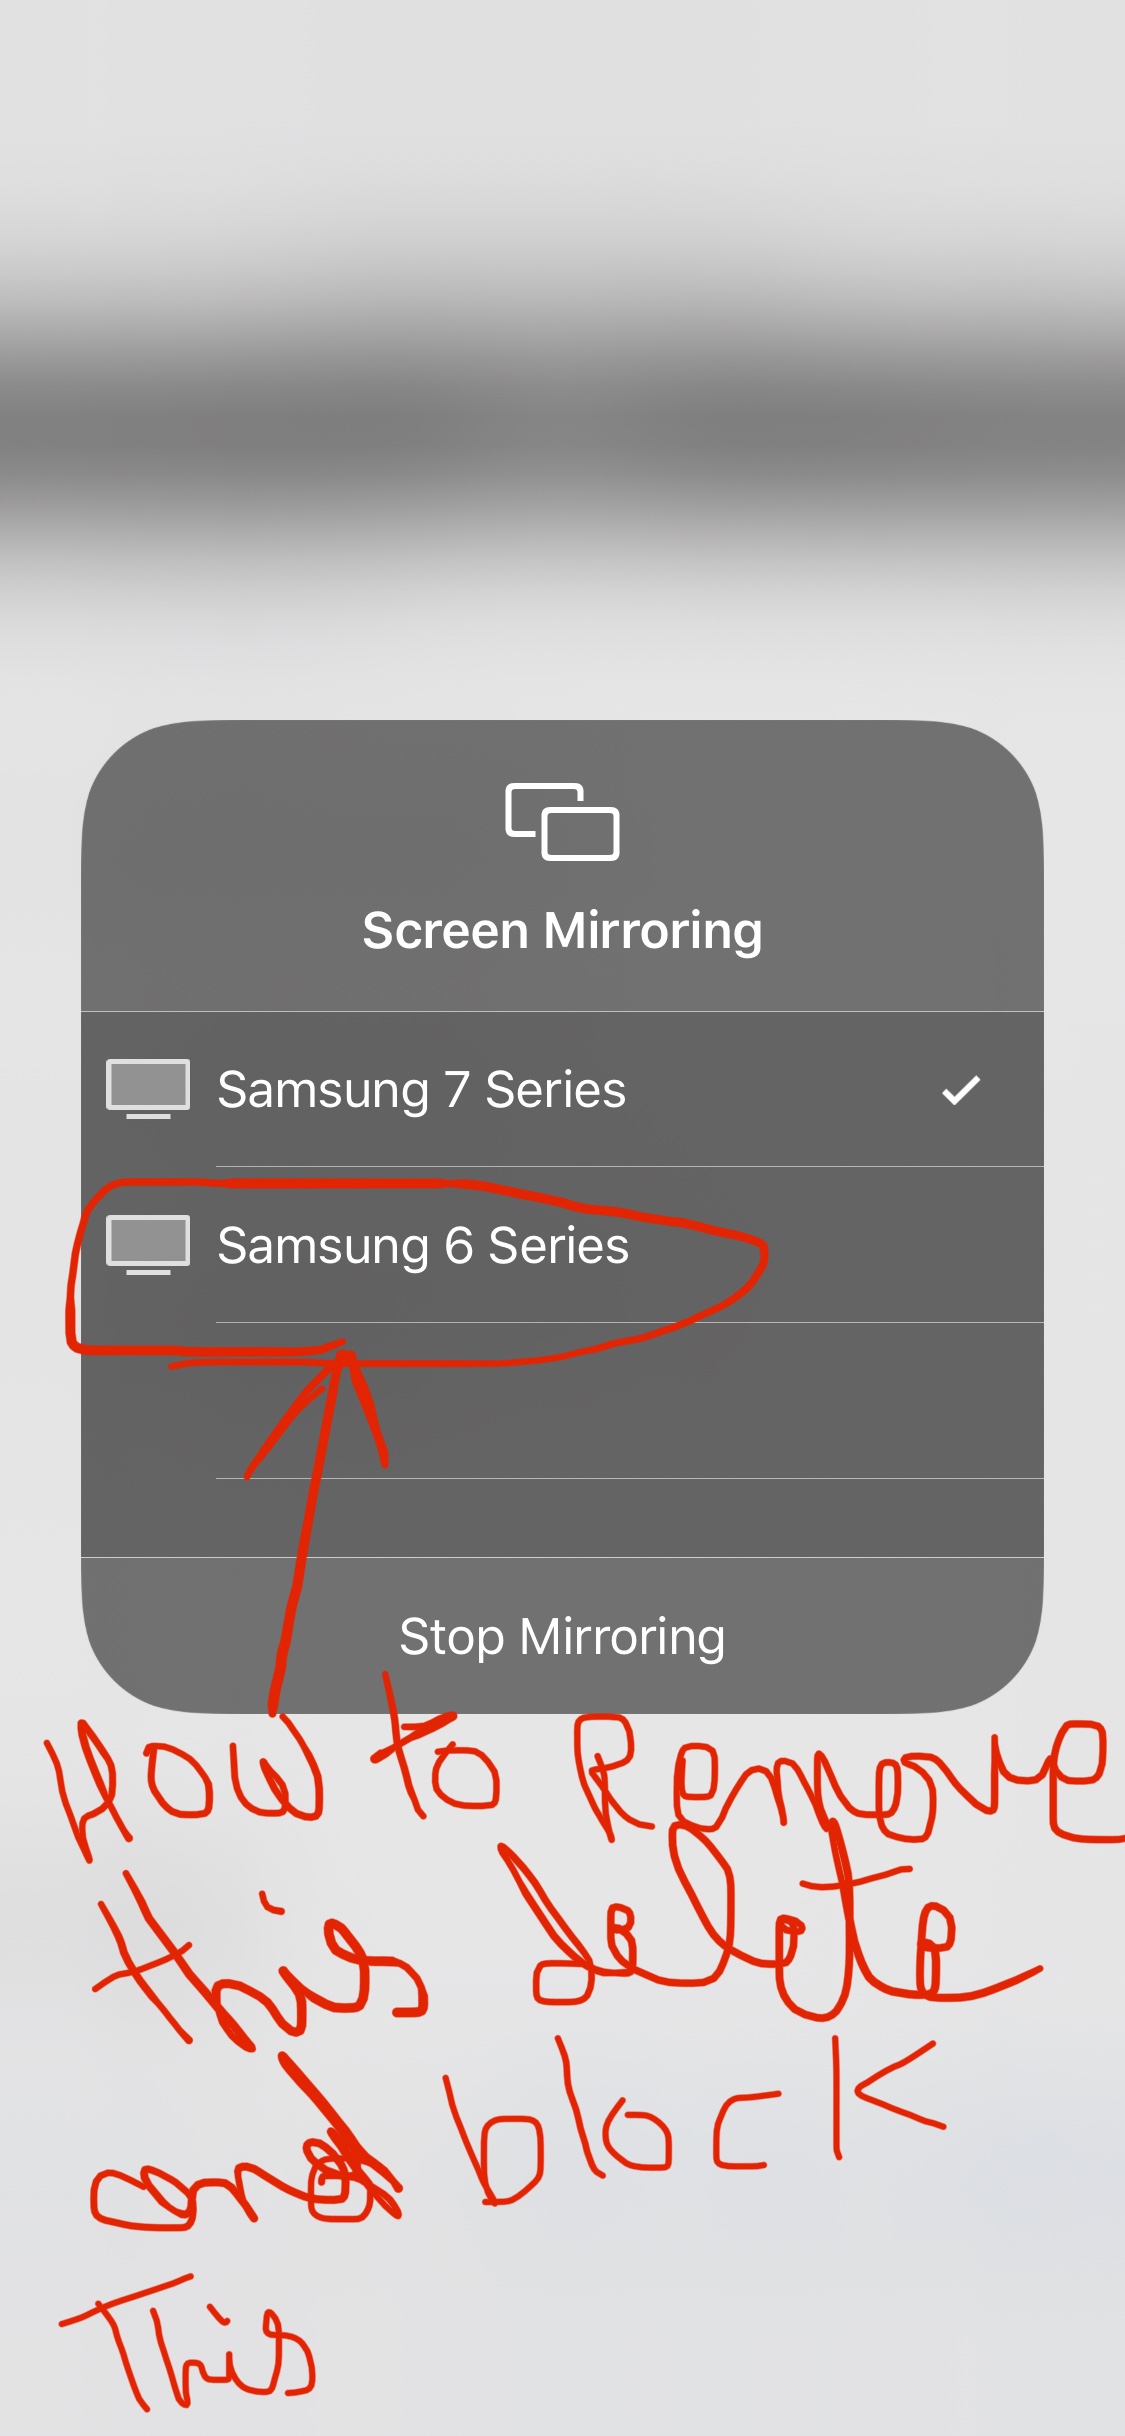 How To Remove Samsung Tv From Iphone, How To Get Samsung Tv Mirror Iphone